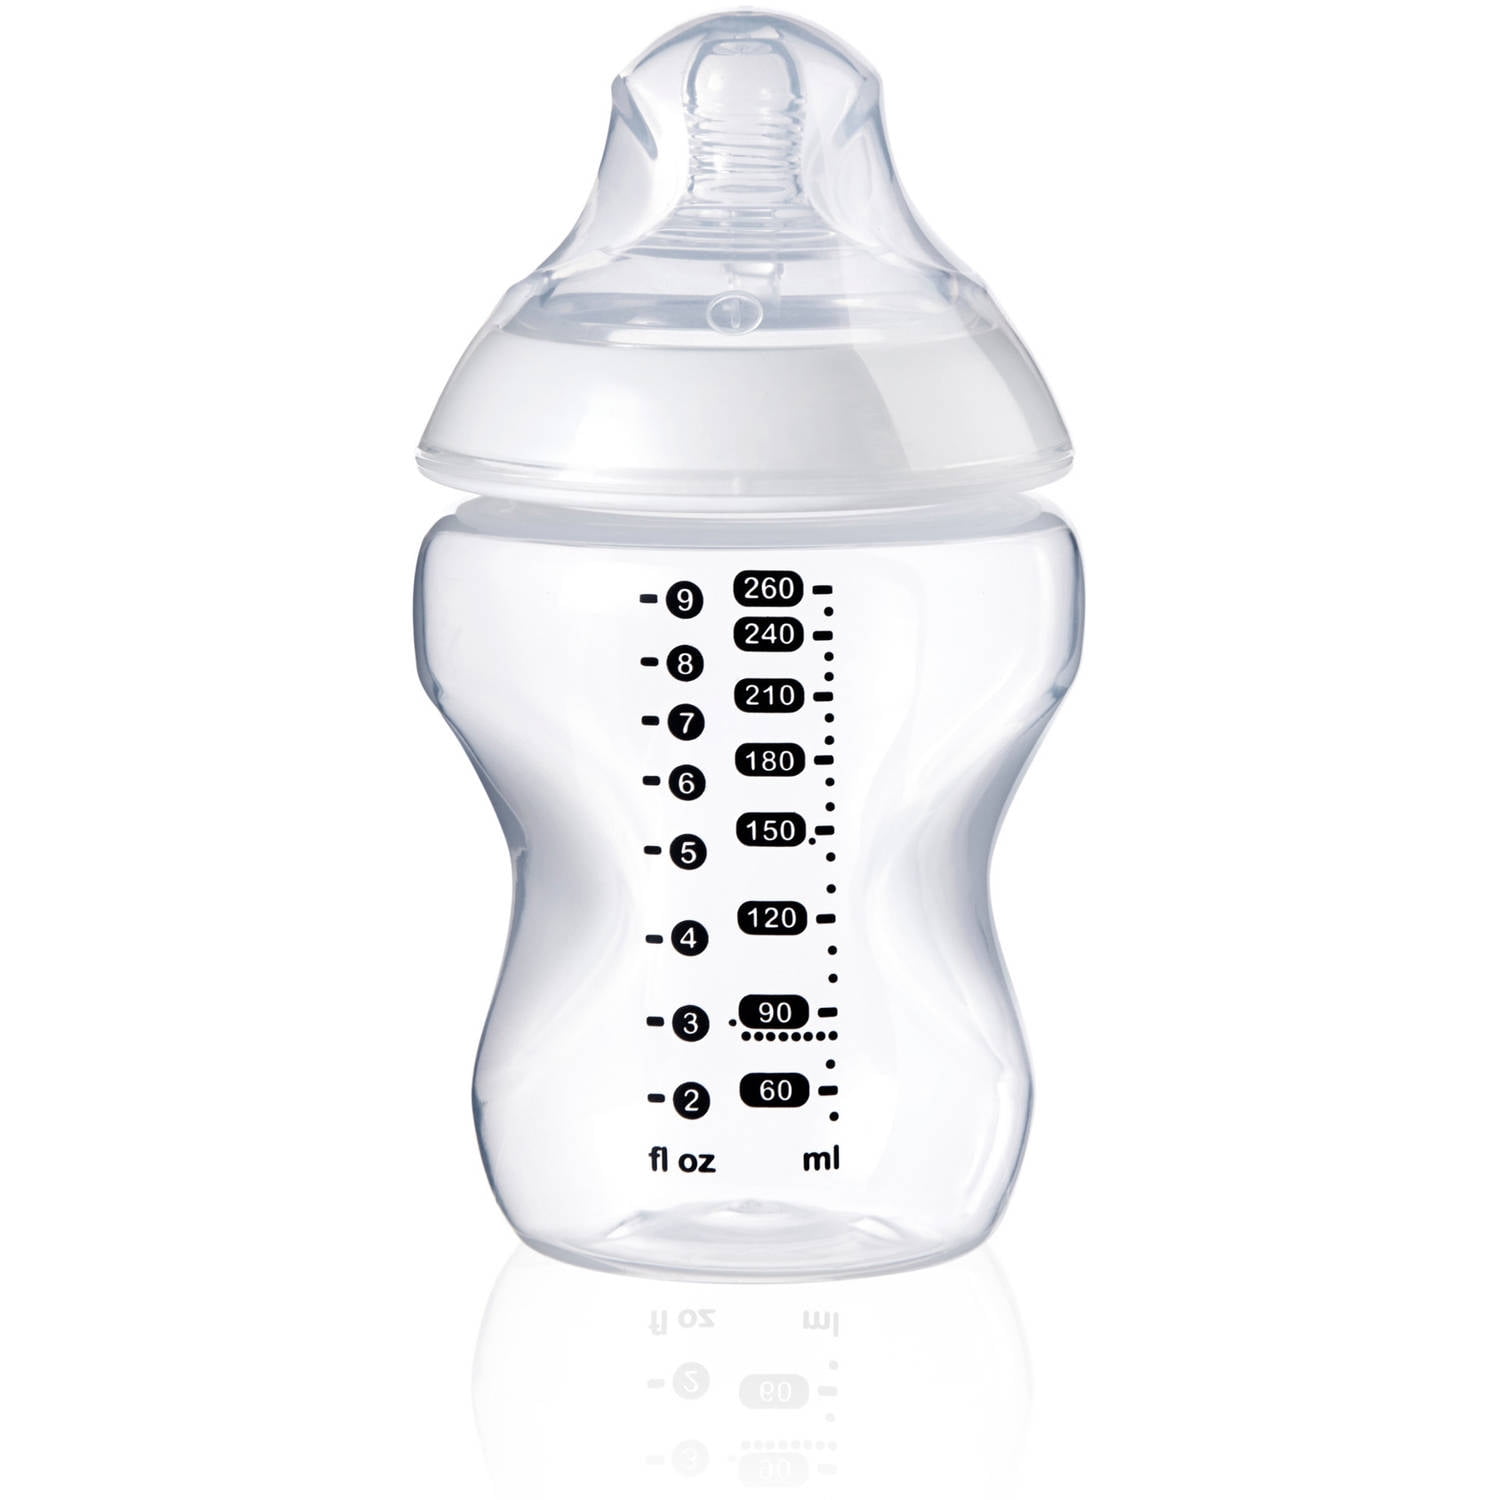 BPA-Free Tommee Tippee Closer to Nature Baby Bottle Breast-like Nipple Slow Flow 2 Count 661146 9 Ounce Anti-Colic 